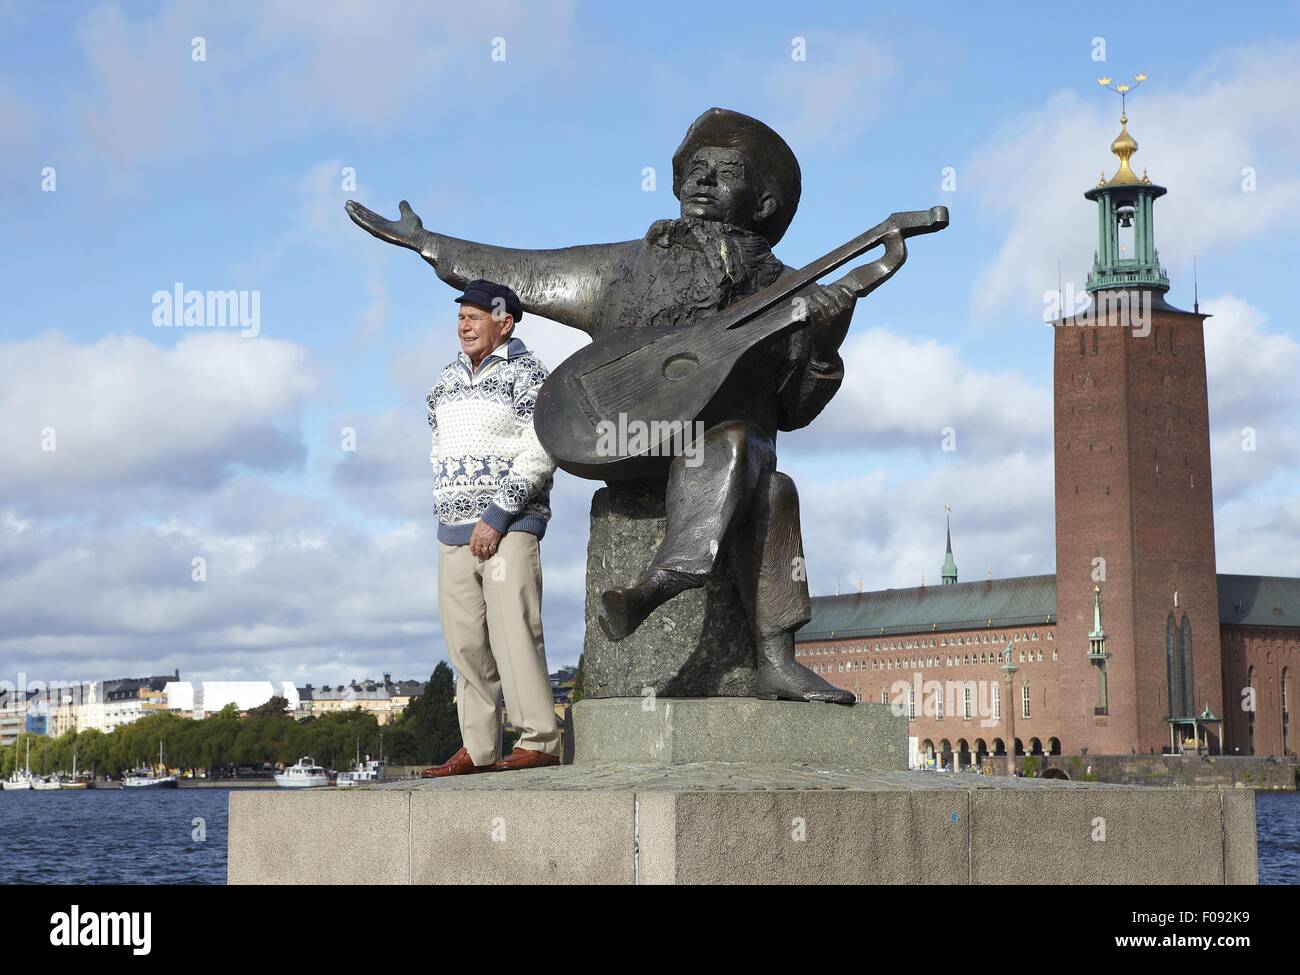 Man standing in front of Monument of National poet Evert Taube, Stockholm Stock Photo